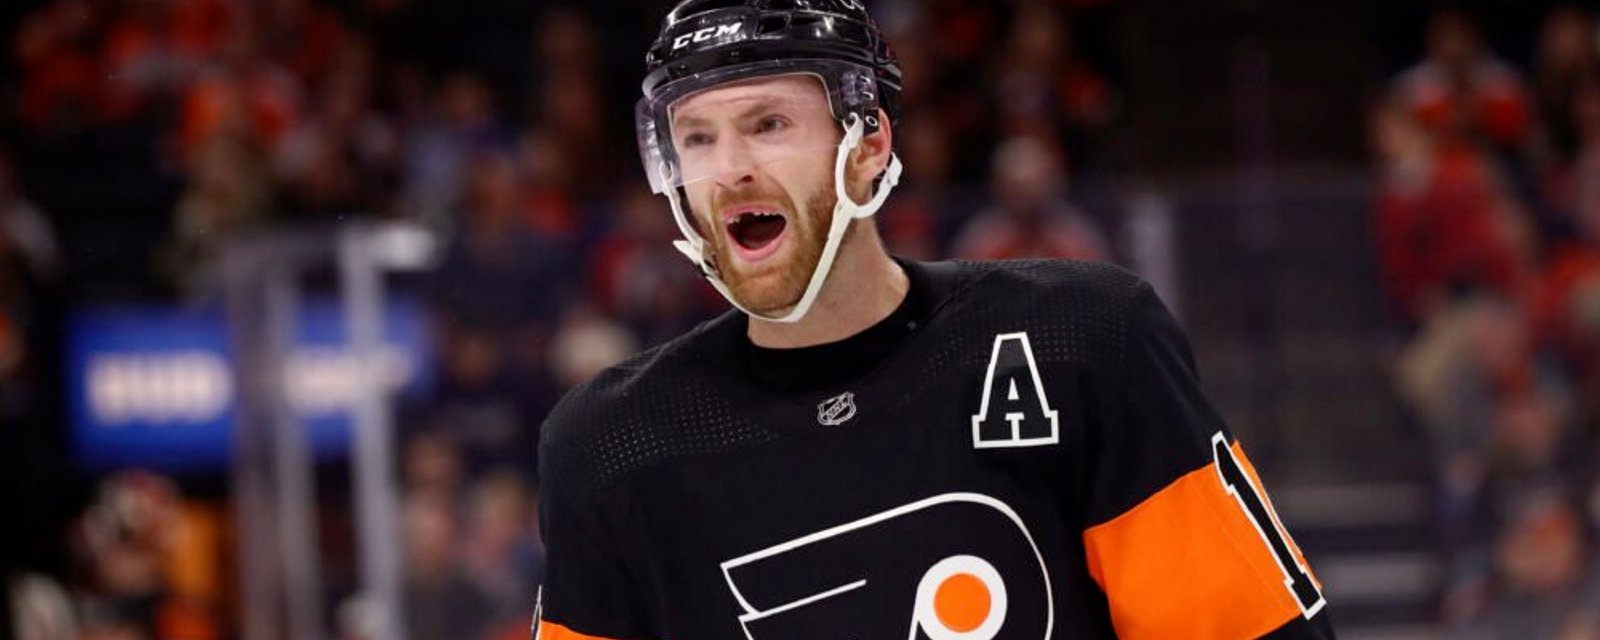 Sean Couturier re-ups with Flyers on a massive eight year deal